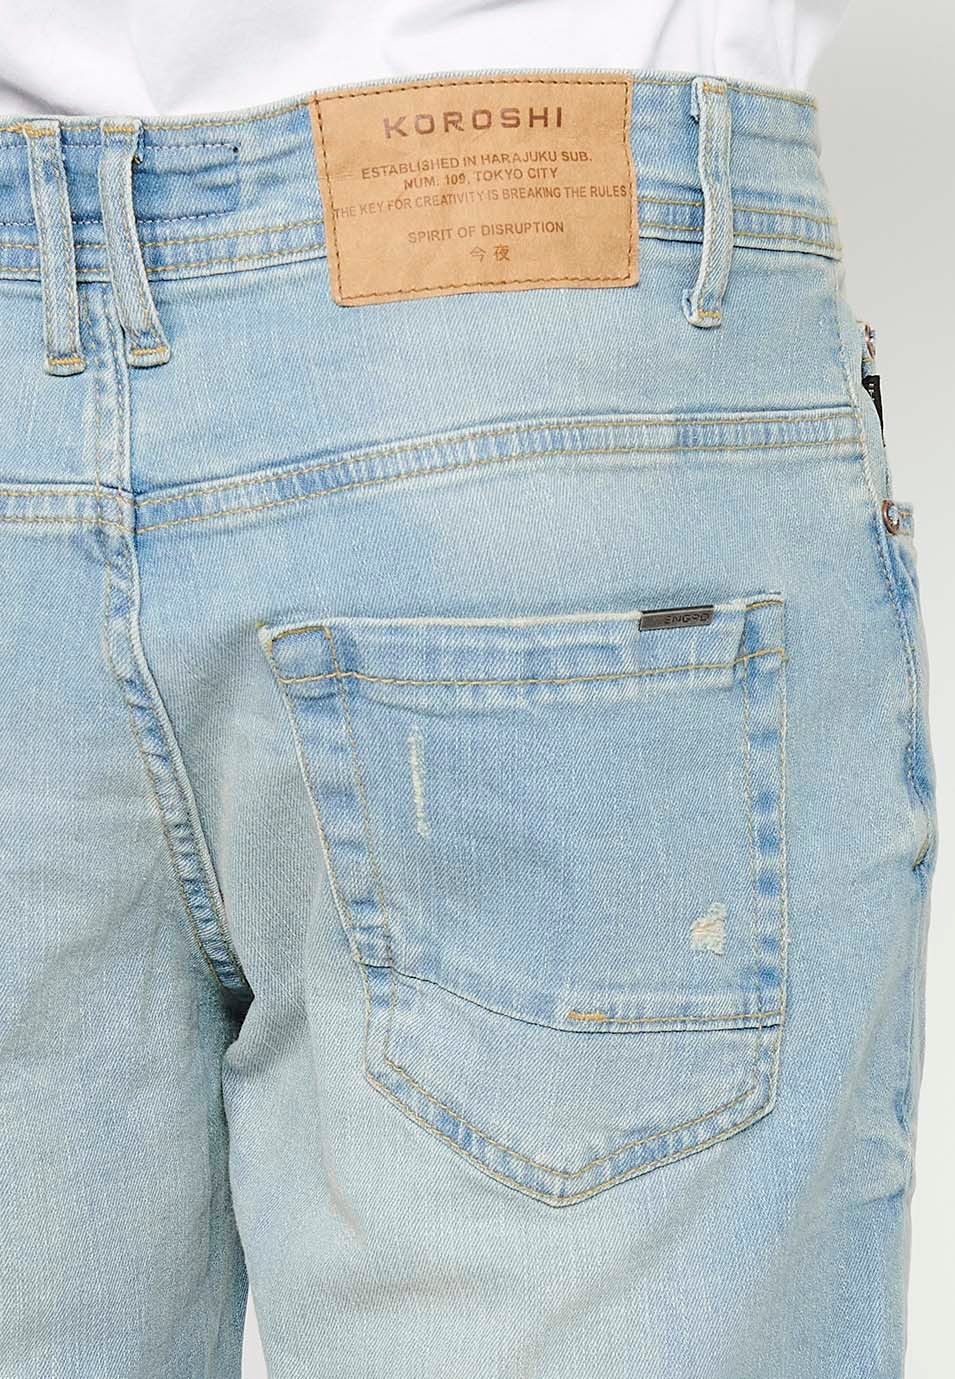 Shorts with turn-up finish and front closure with zipper and button and five pockets, one blue pocket pocket for men 4